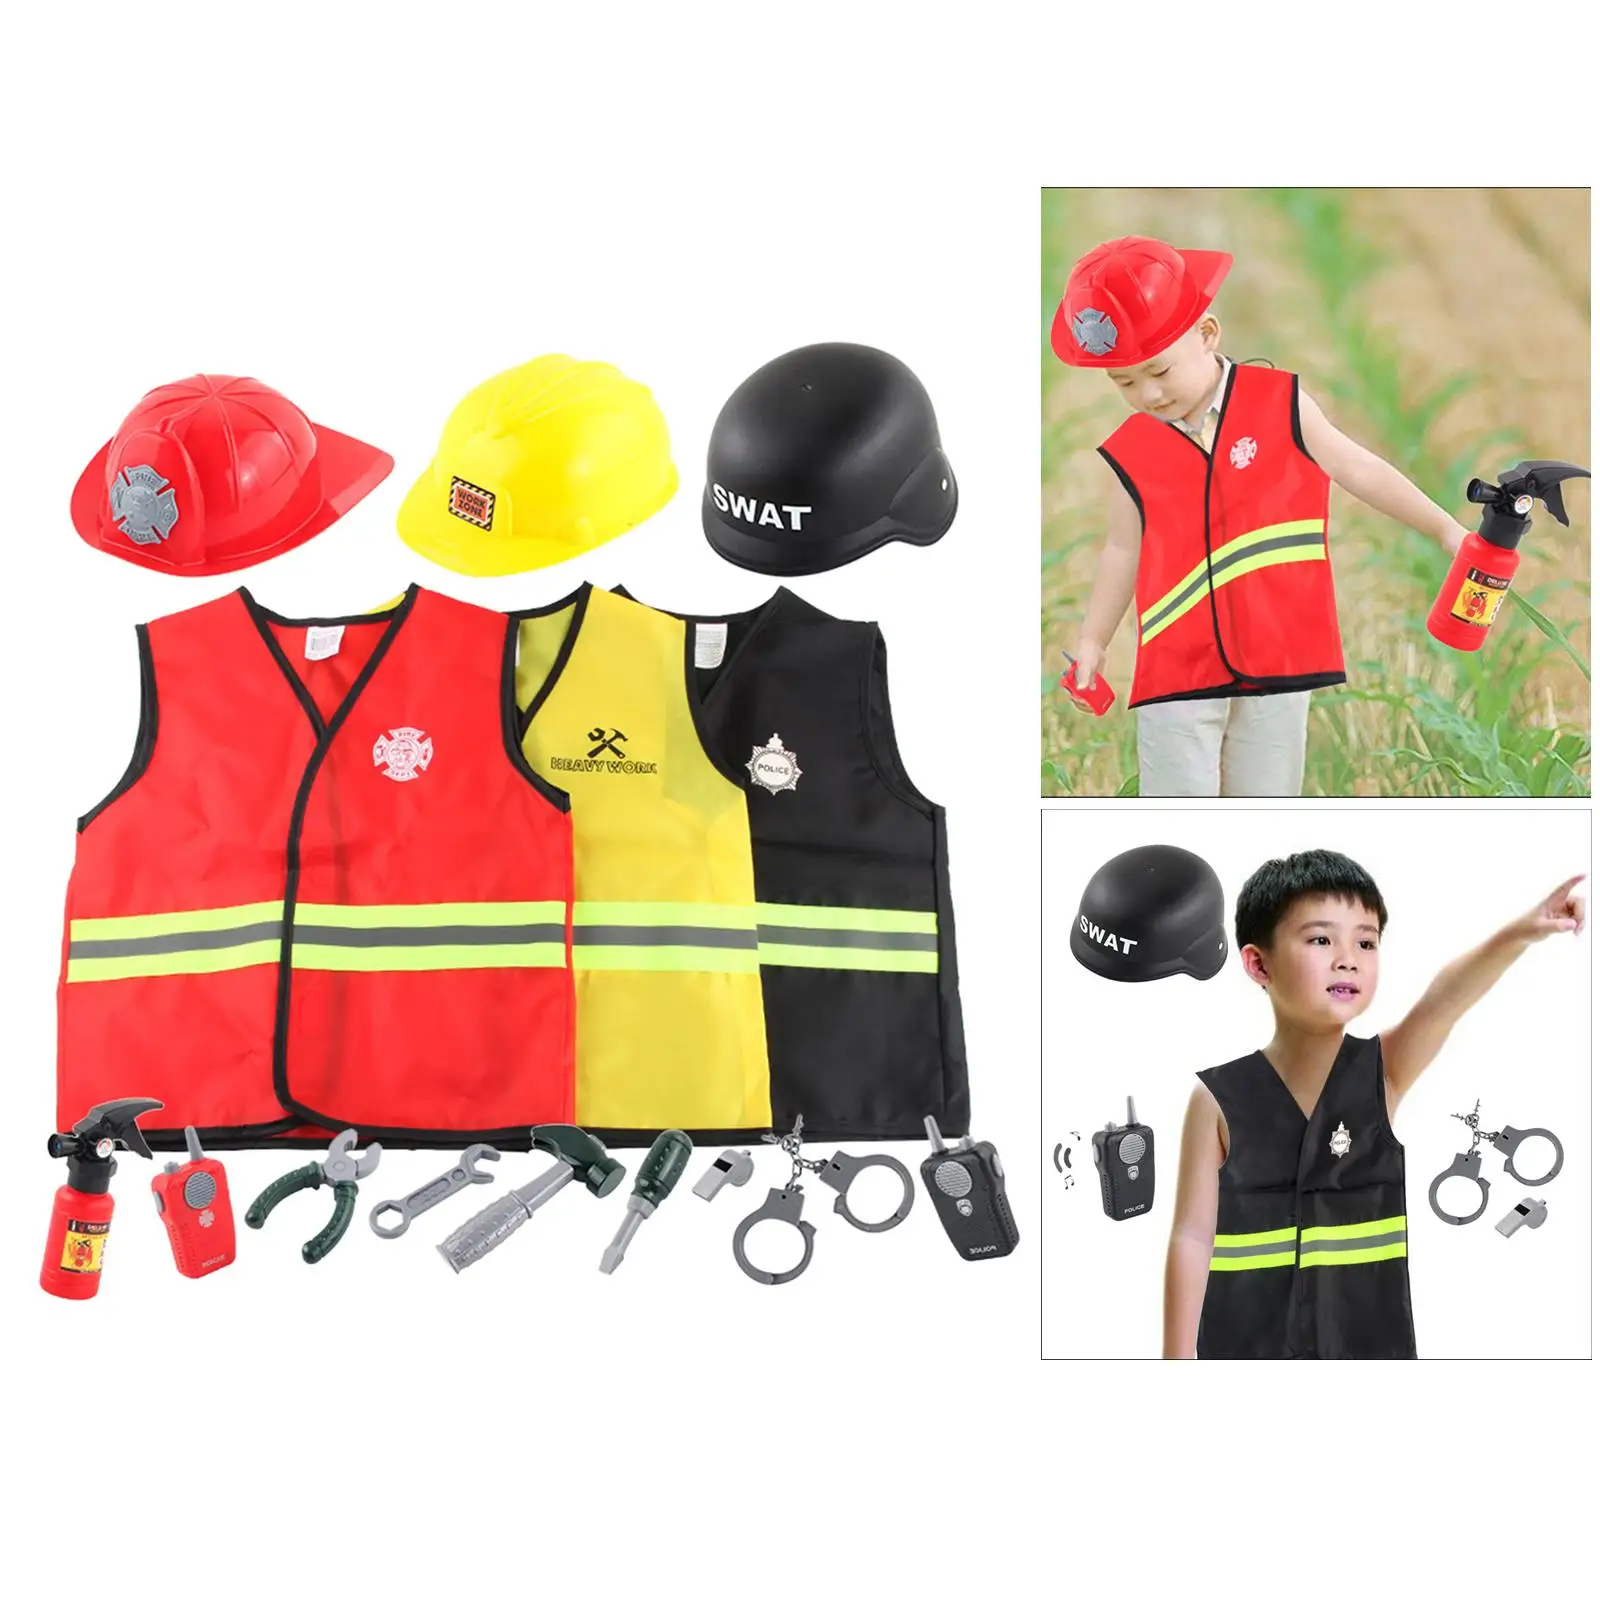 Fireman Costume Firefighter Dress up for Christmas Party Stage Performances Girls Boys